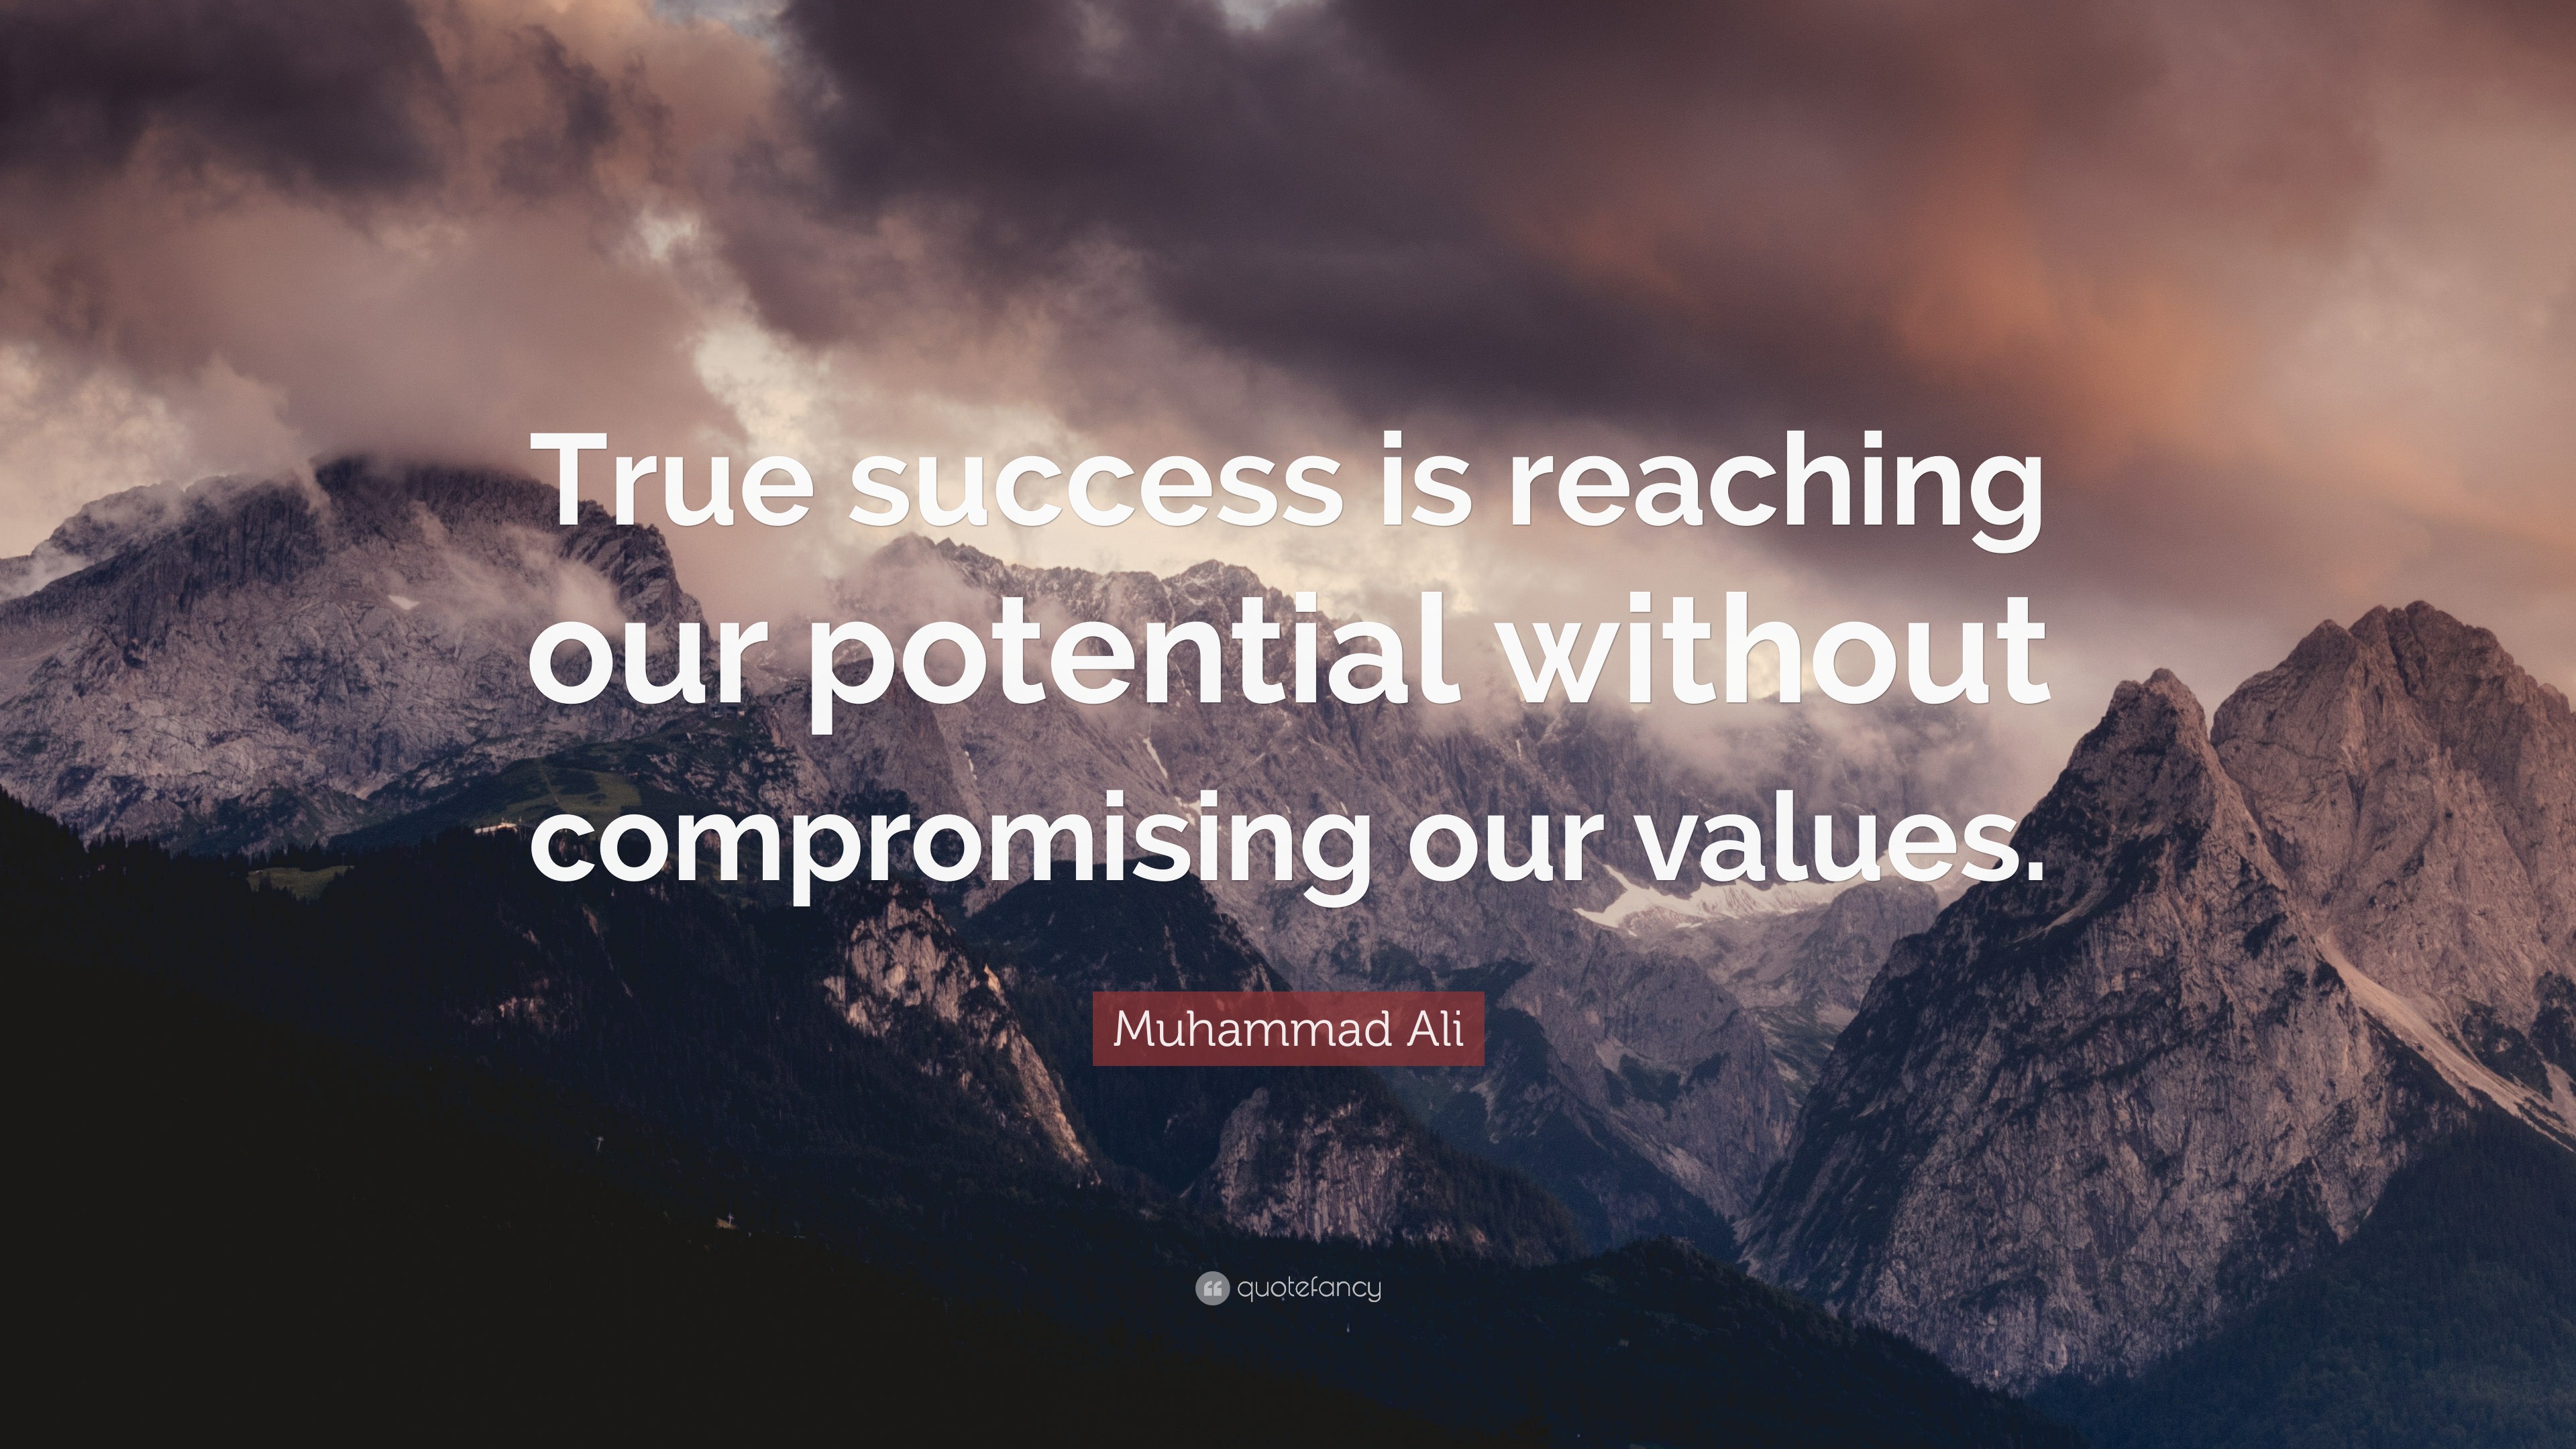 Muhammad Ali Quote: “True success is reaching our potential without ...